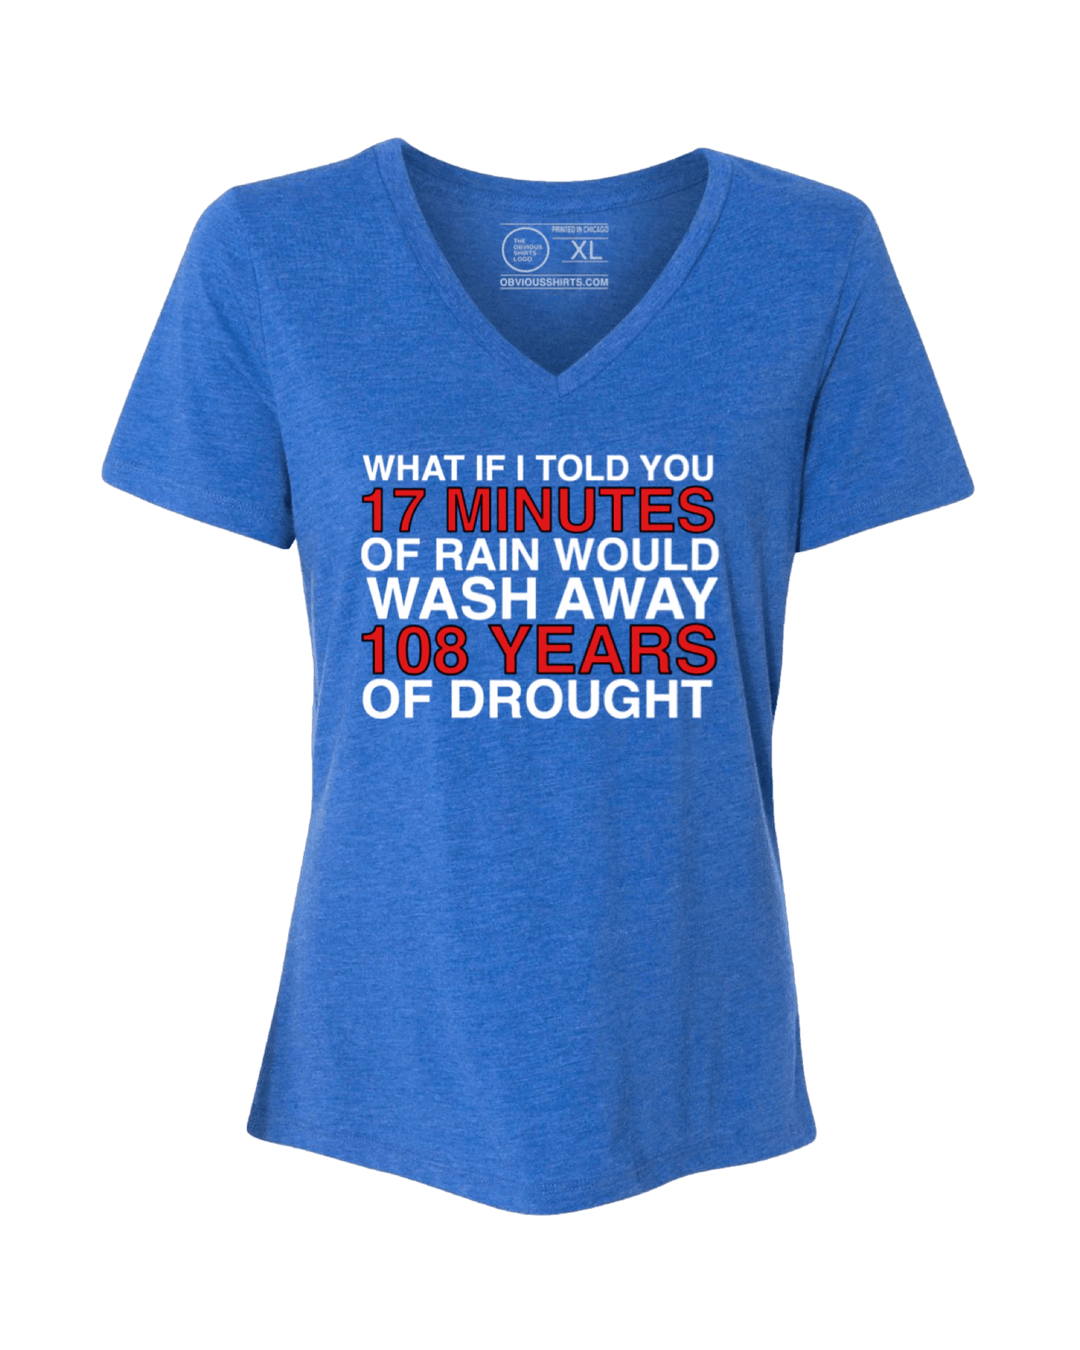 WHAT IF I TOLD YOU...(WOMEN'S V-NECK) - OBVIOUS SHIRTS